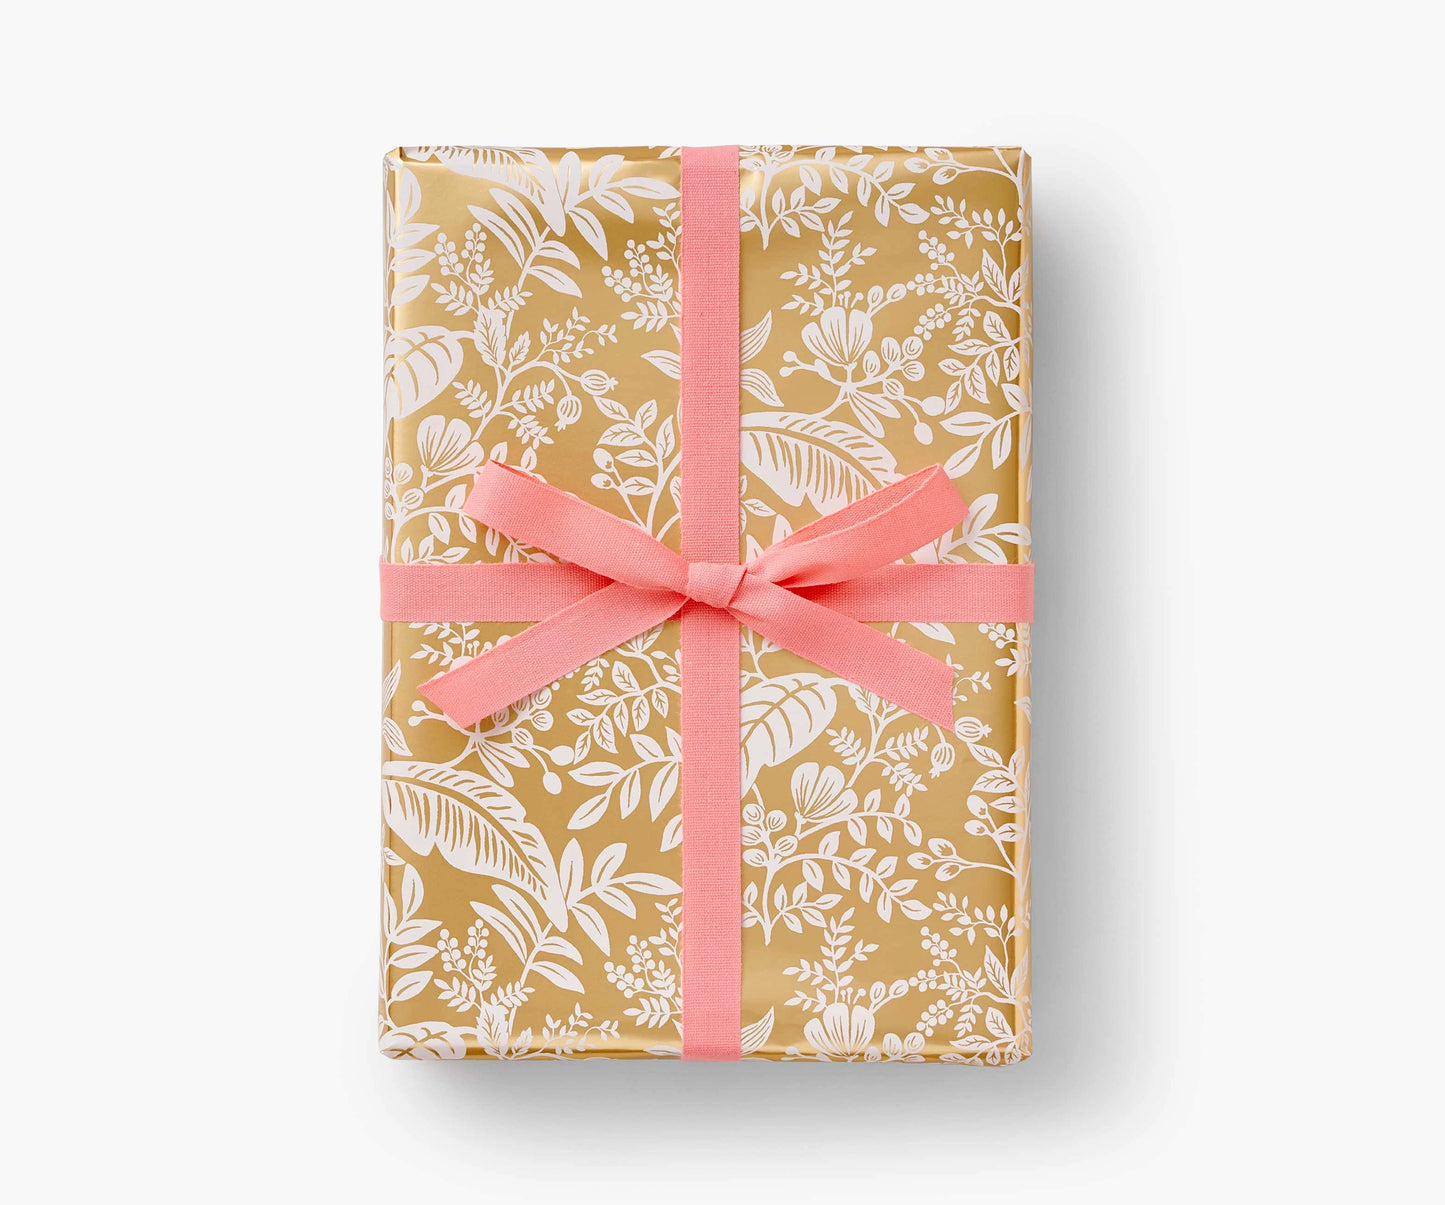 Wrapping Paper - Rifle Paper Co.